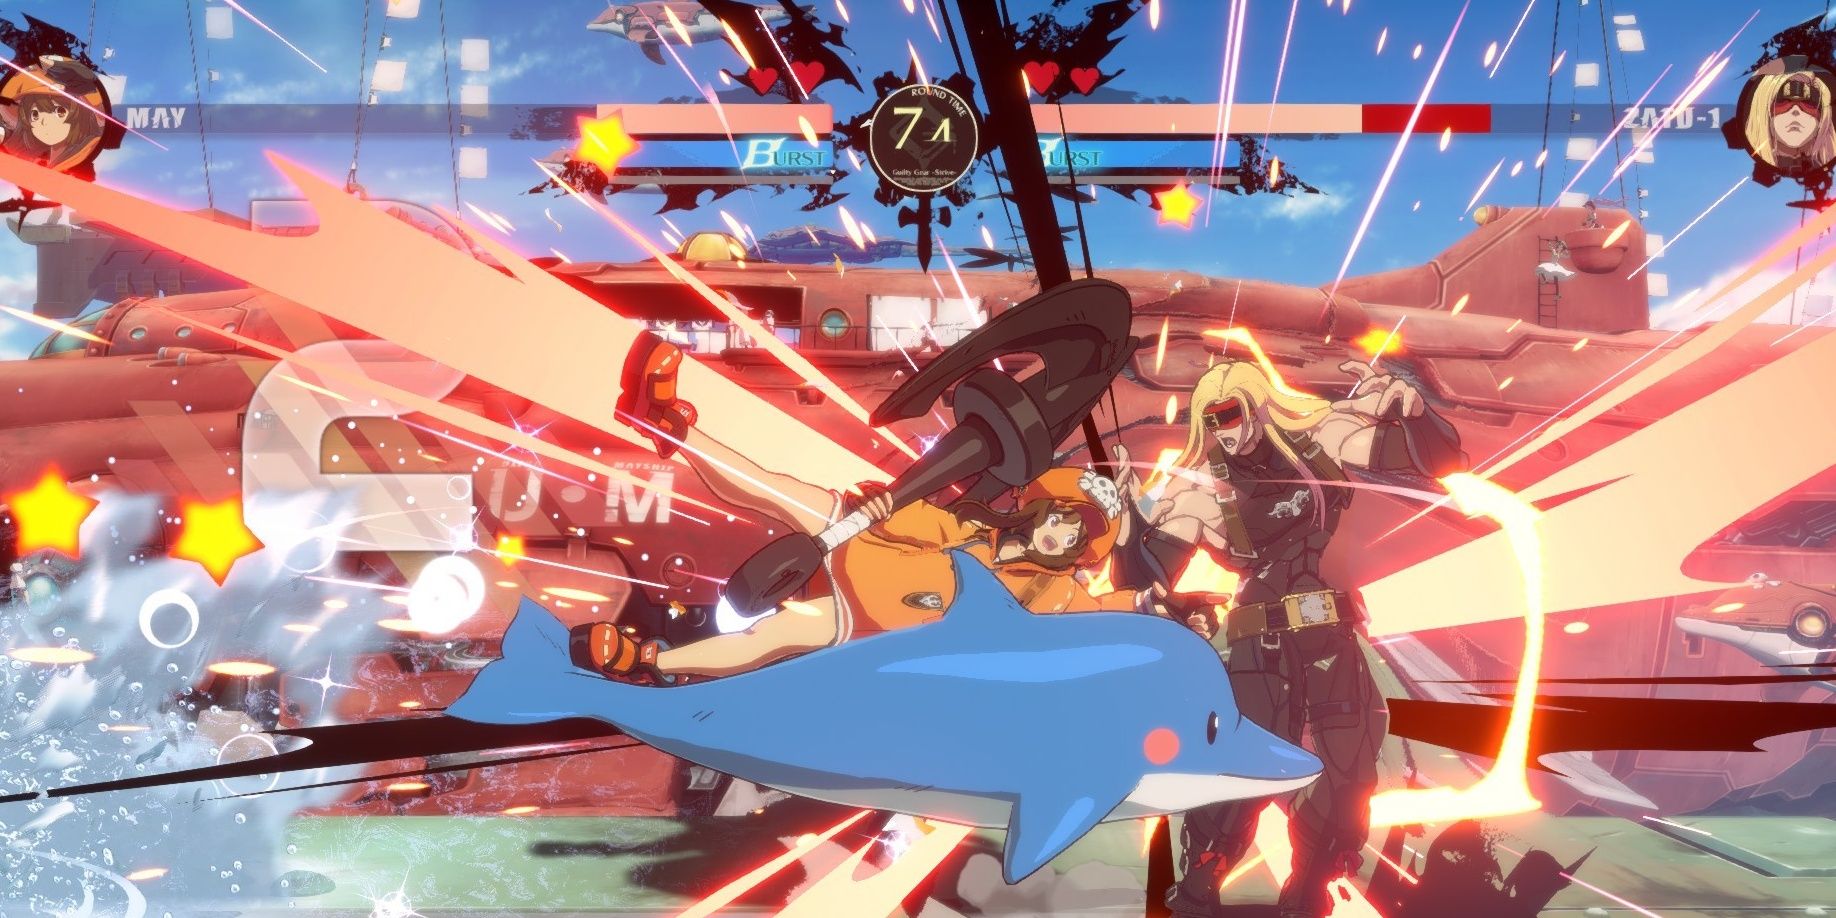 May using a dolphin in combat in Guilty Gear Strive